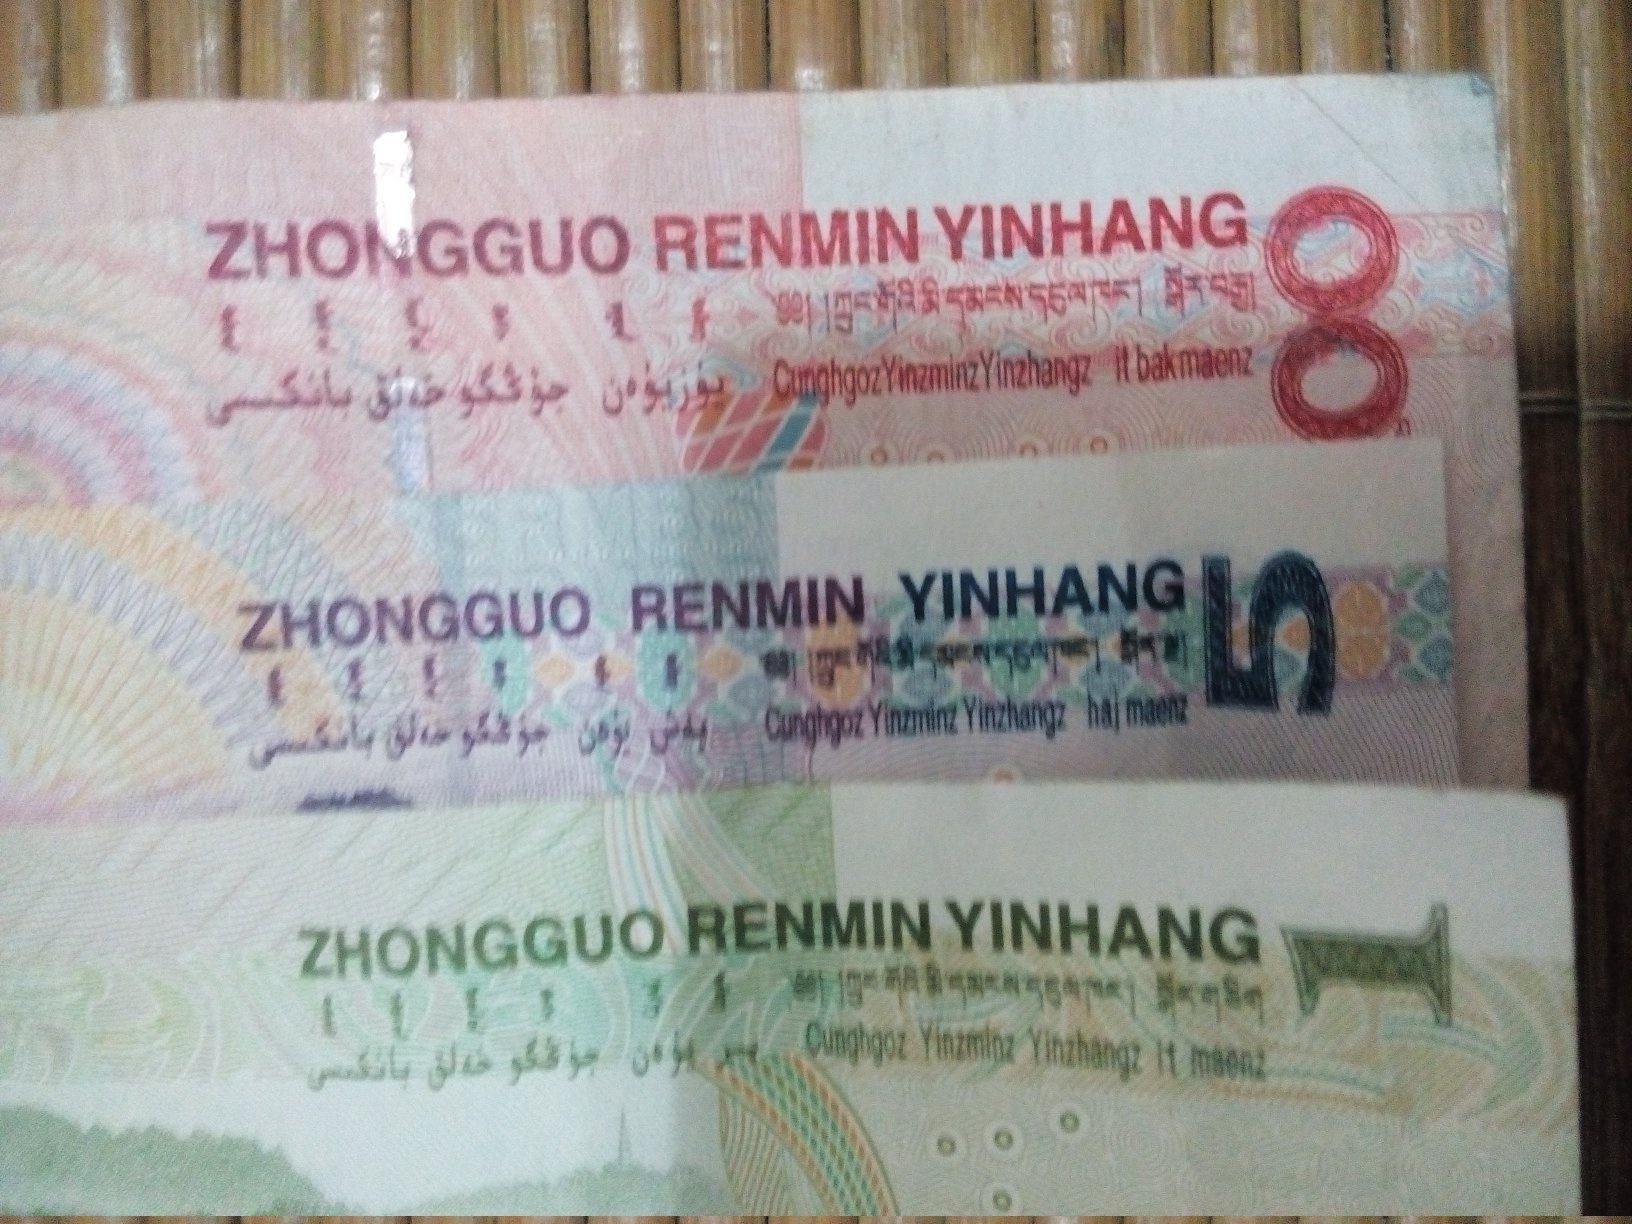 Languages on Chinese RMB currency